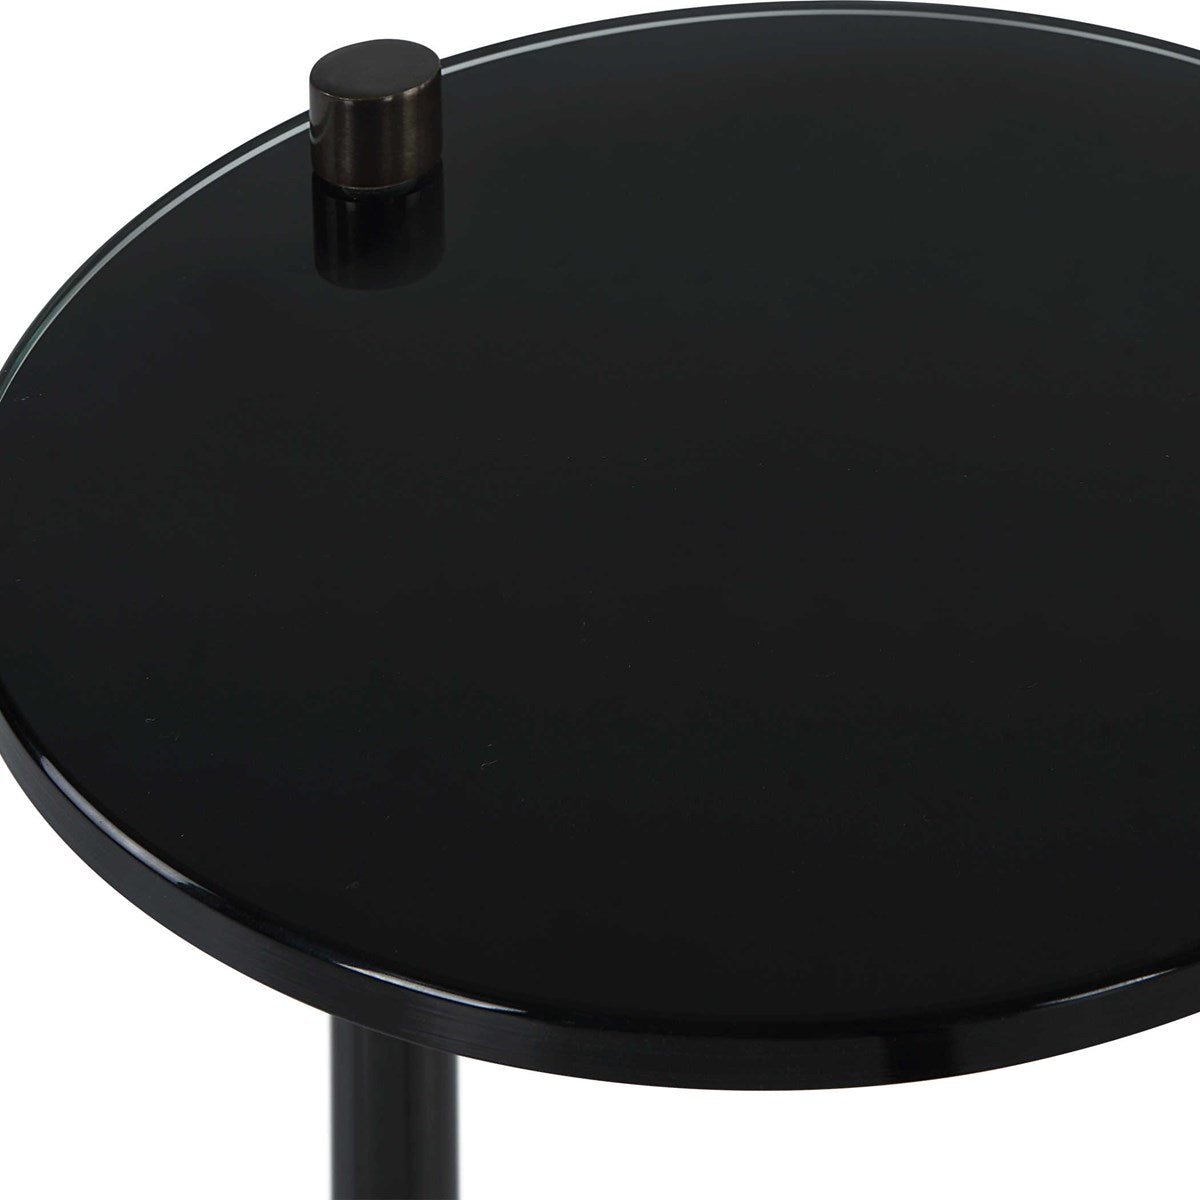 Eclipse Accent Table